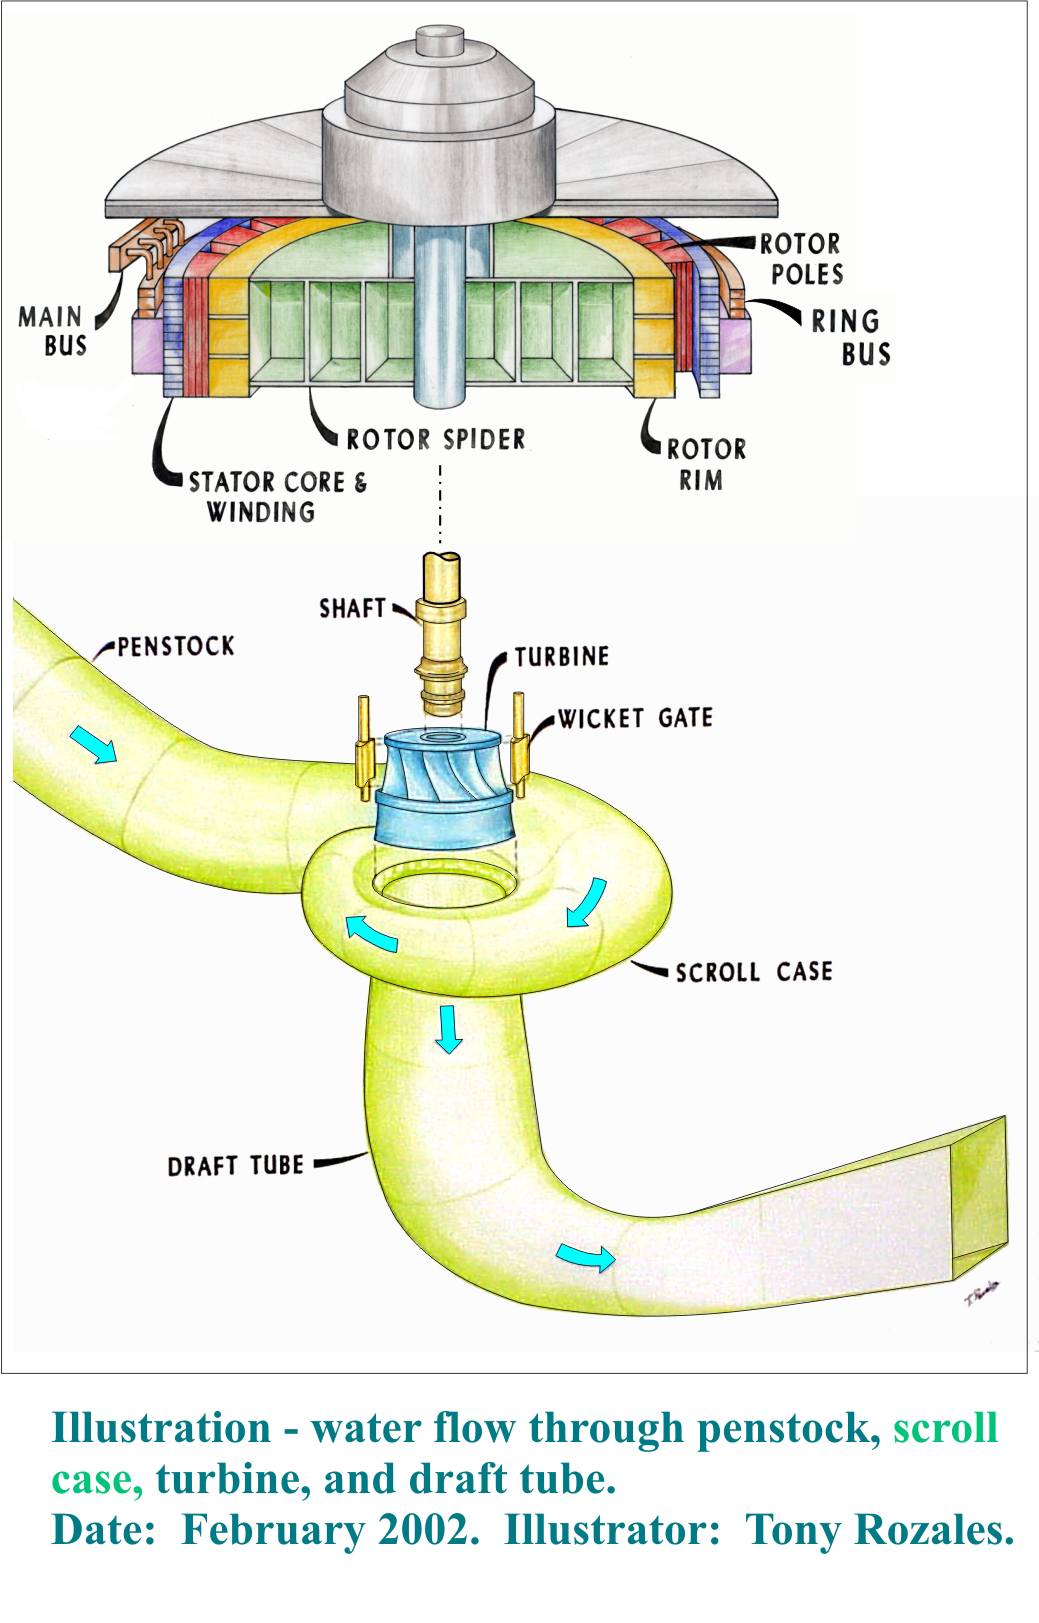 Illustration of water flowing through penstock, scroll case, turbine, and draft tube